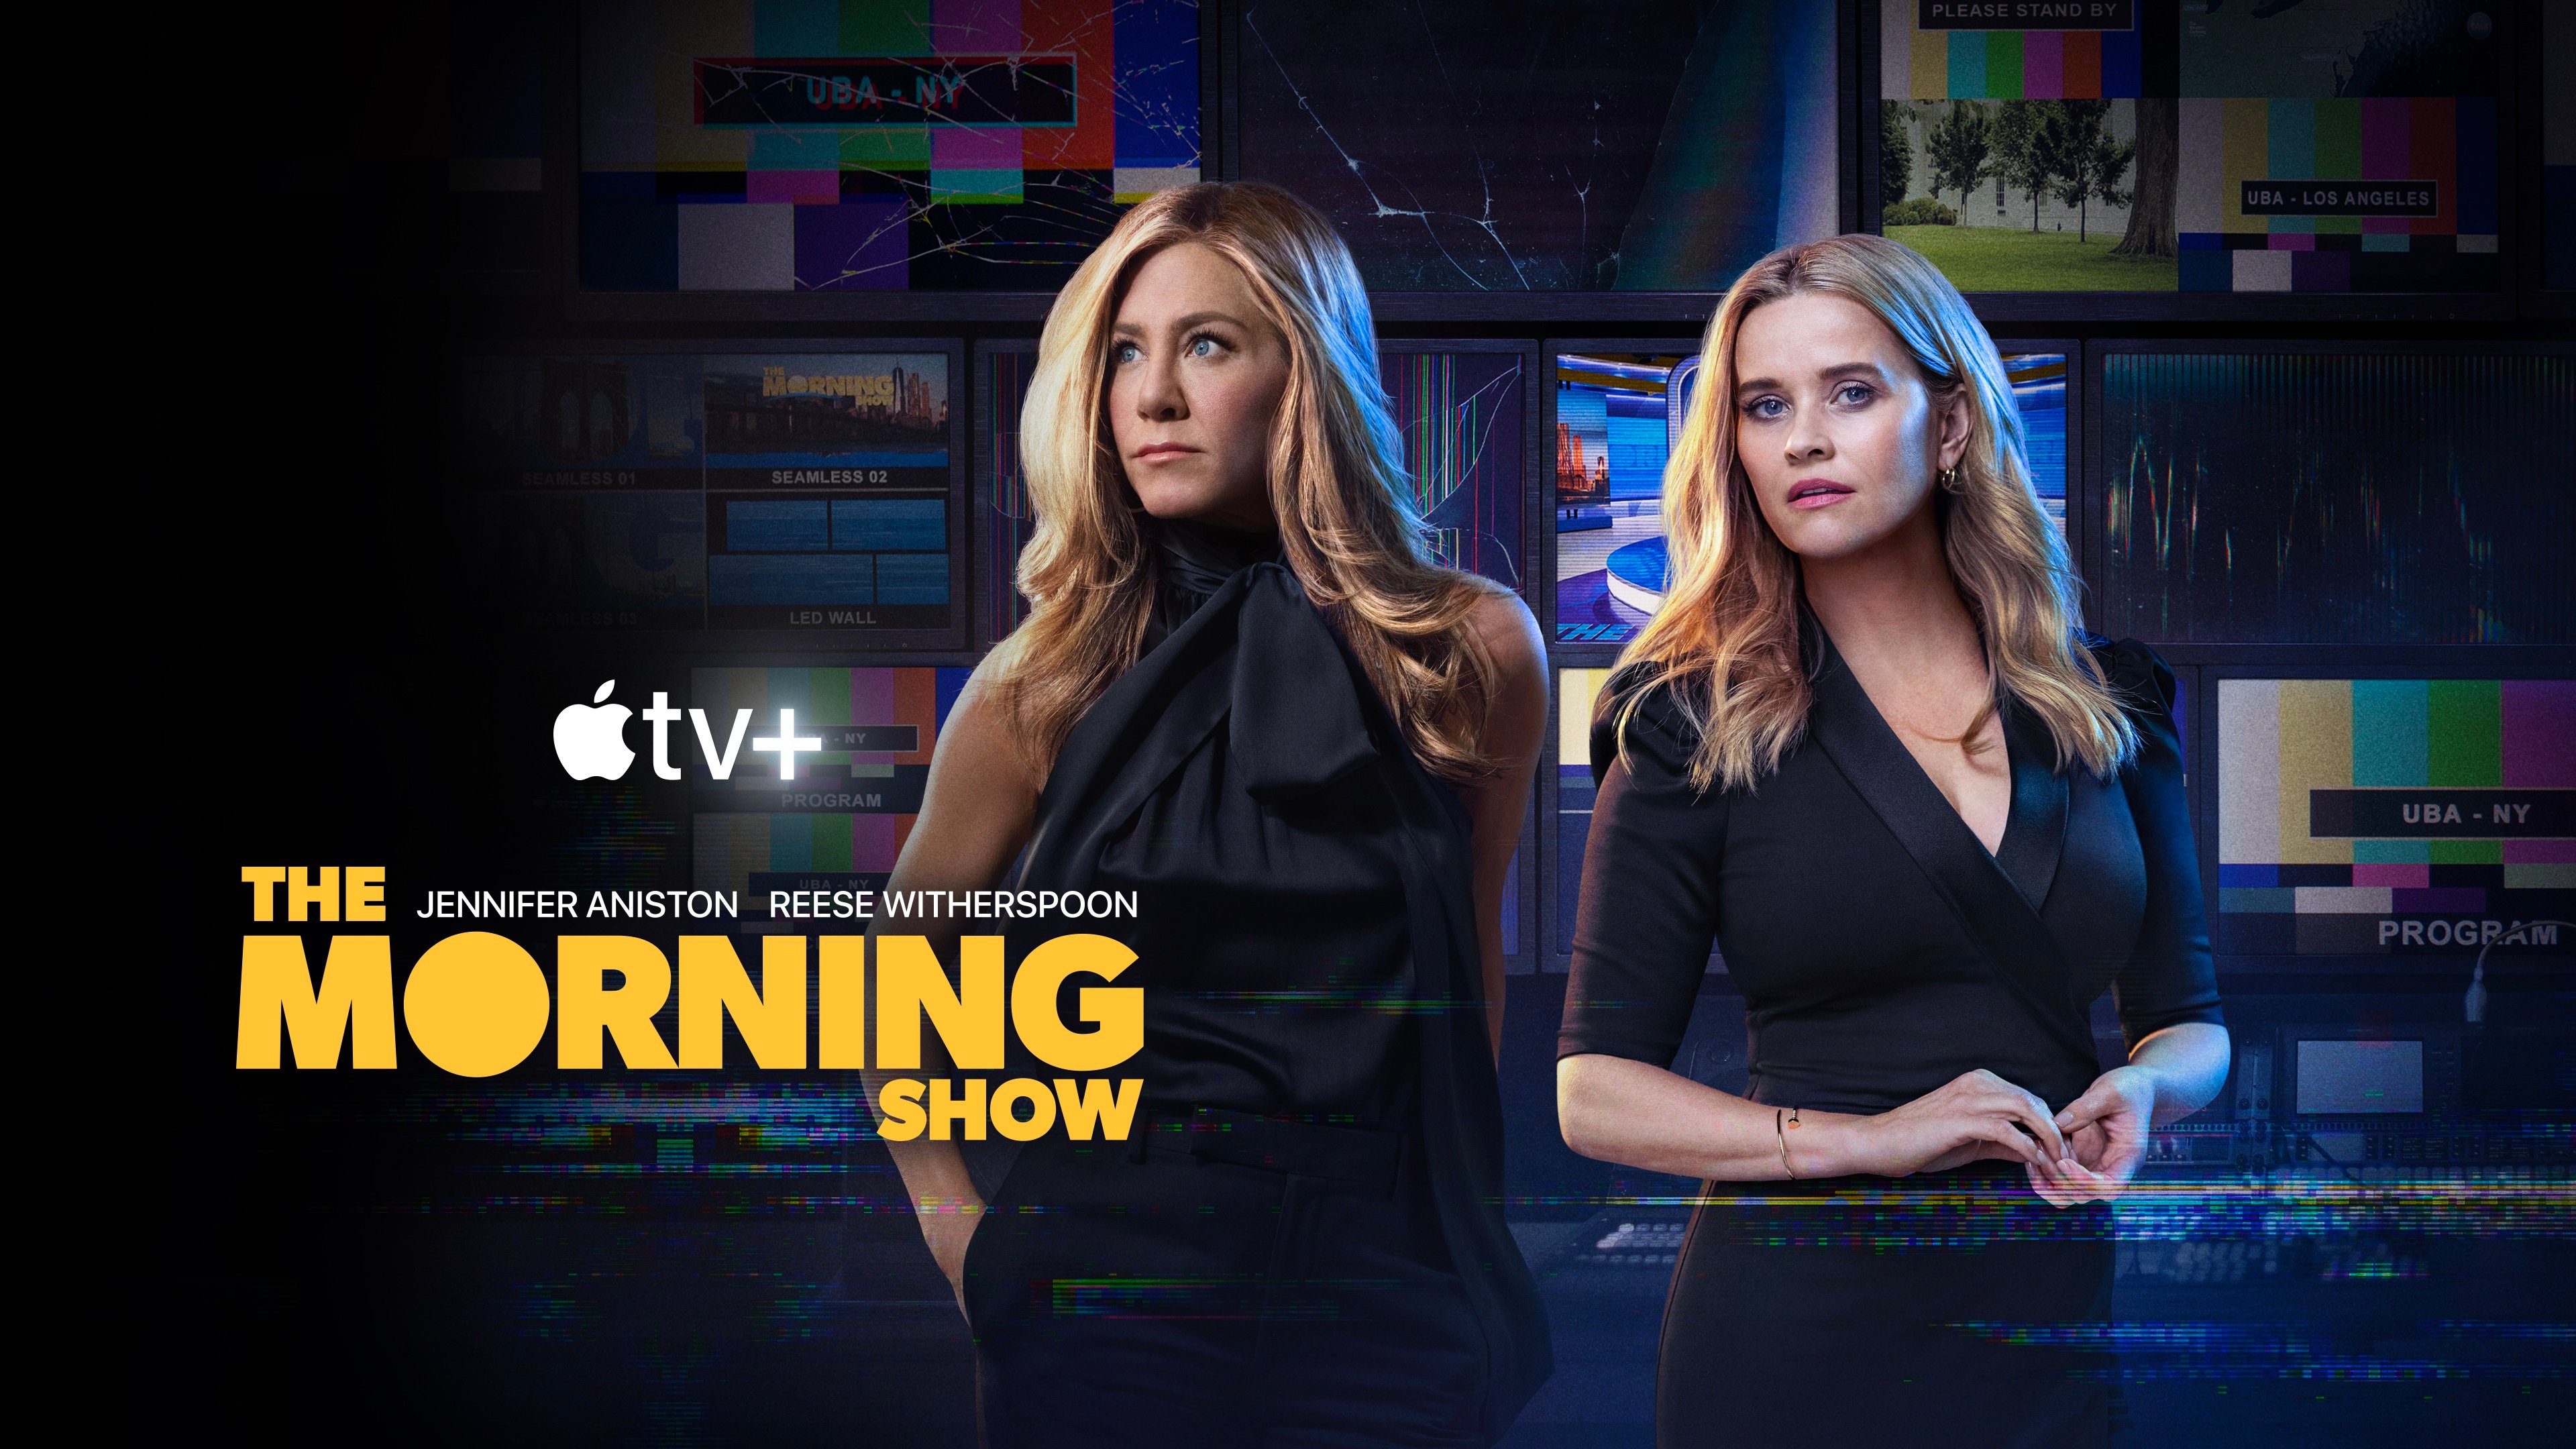 The Morning Show cast stars Jennifer Aniston and Reese Witherspoon